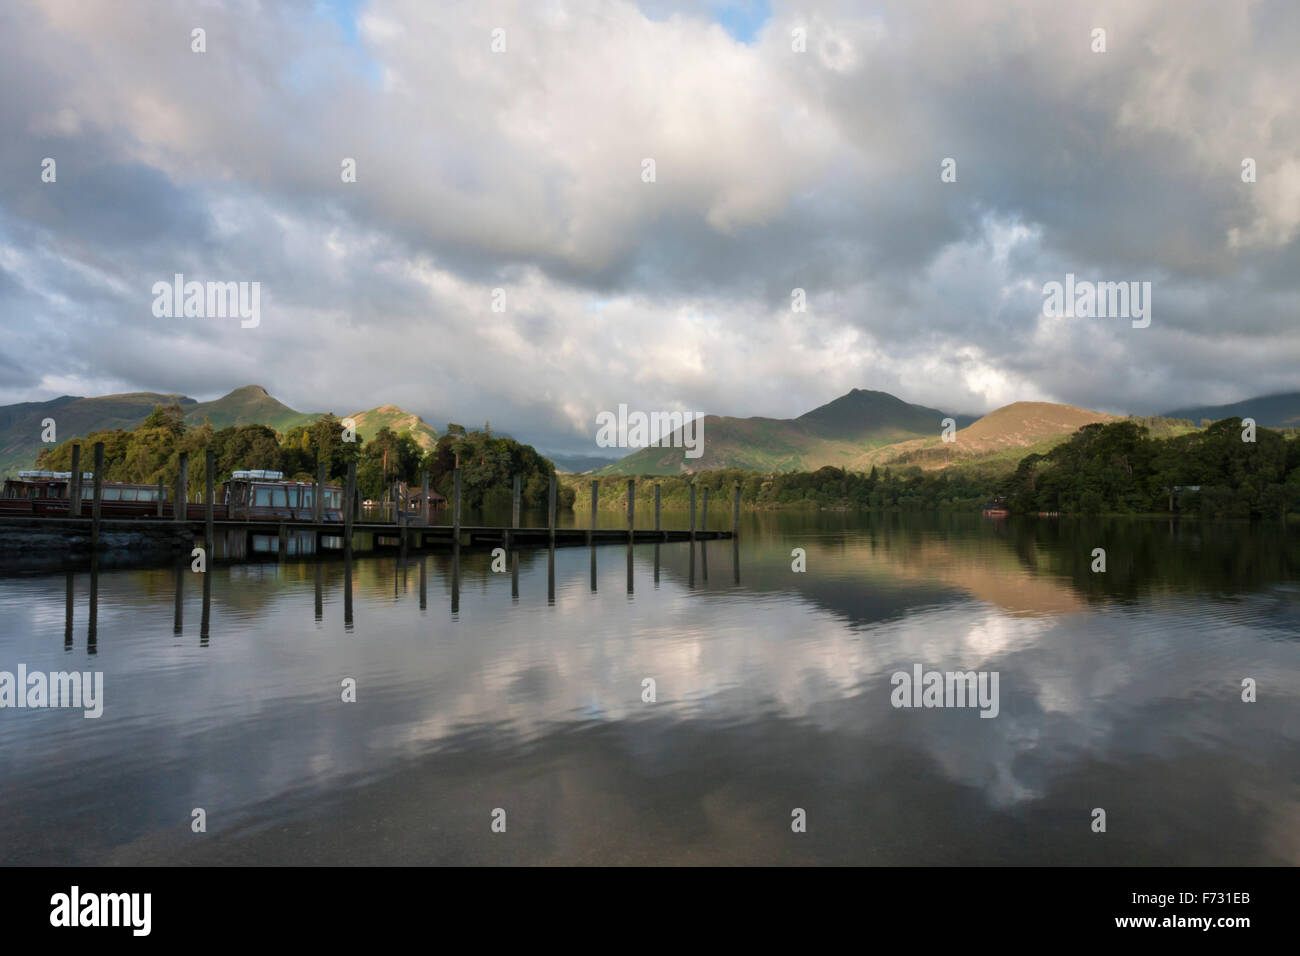 View of landing stage and reflections on Derwent Water, Keswick, Lake District, Cumbria, England, UK Stock Photo